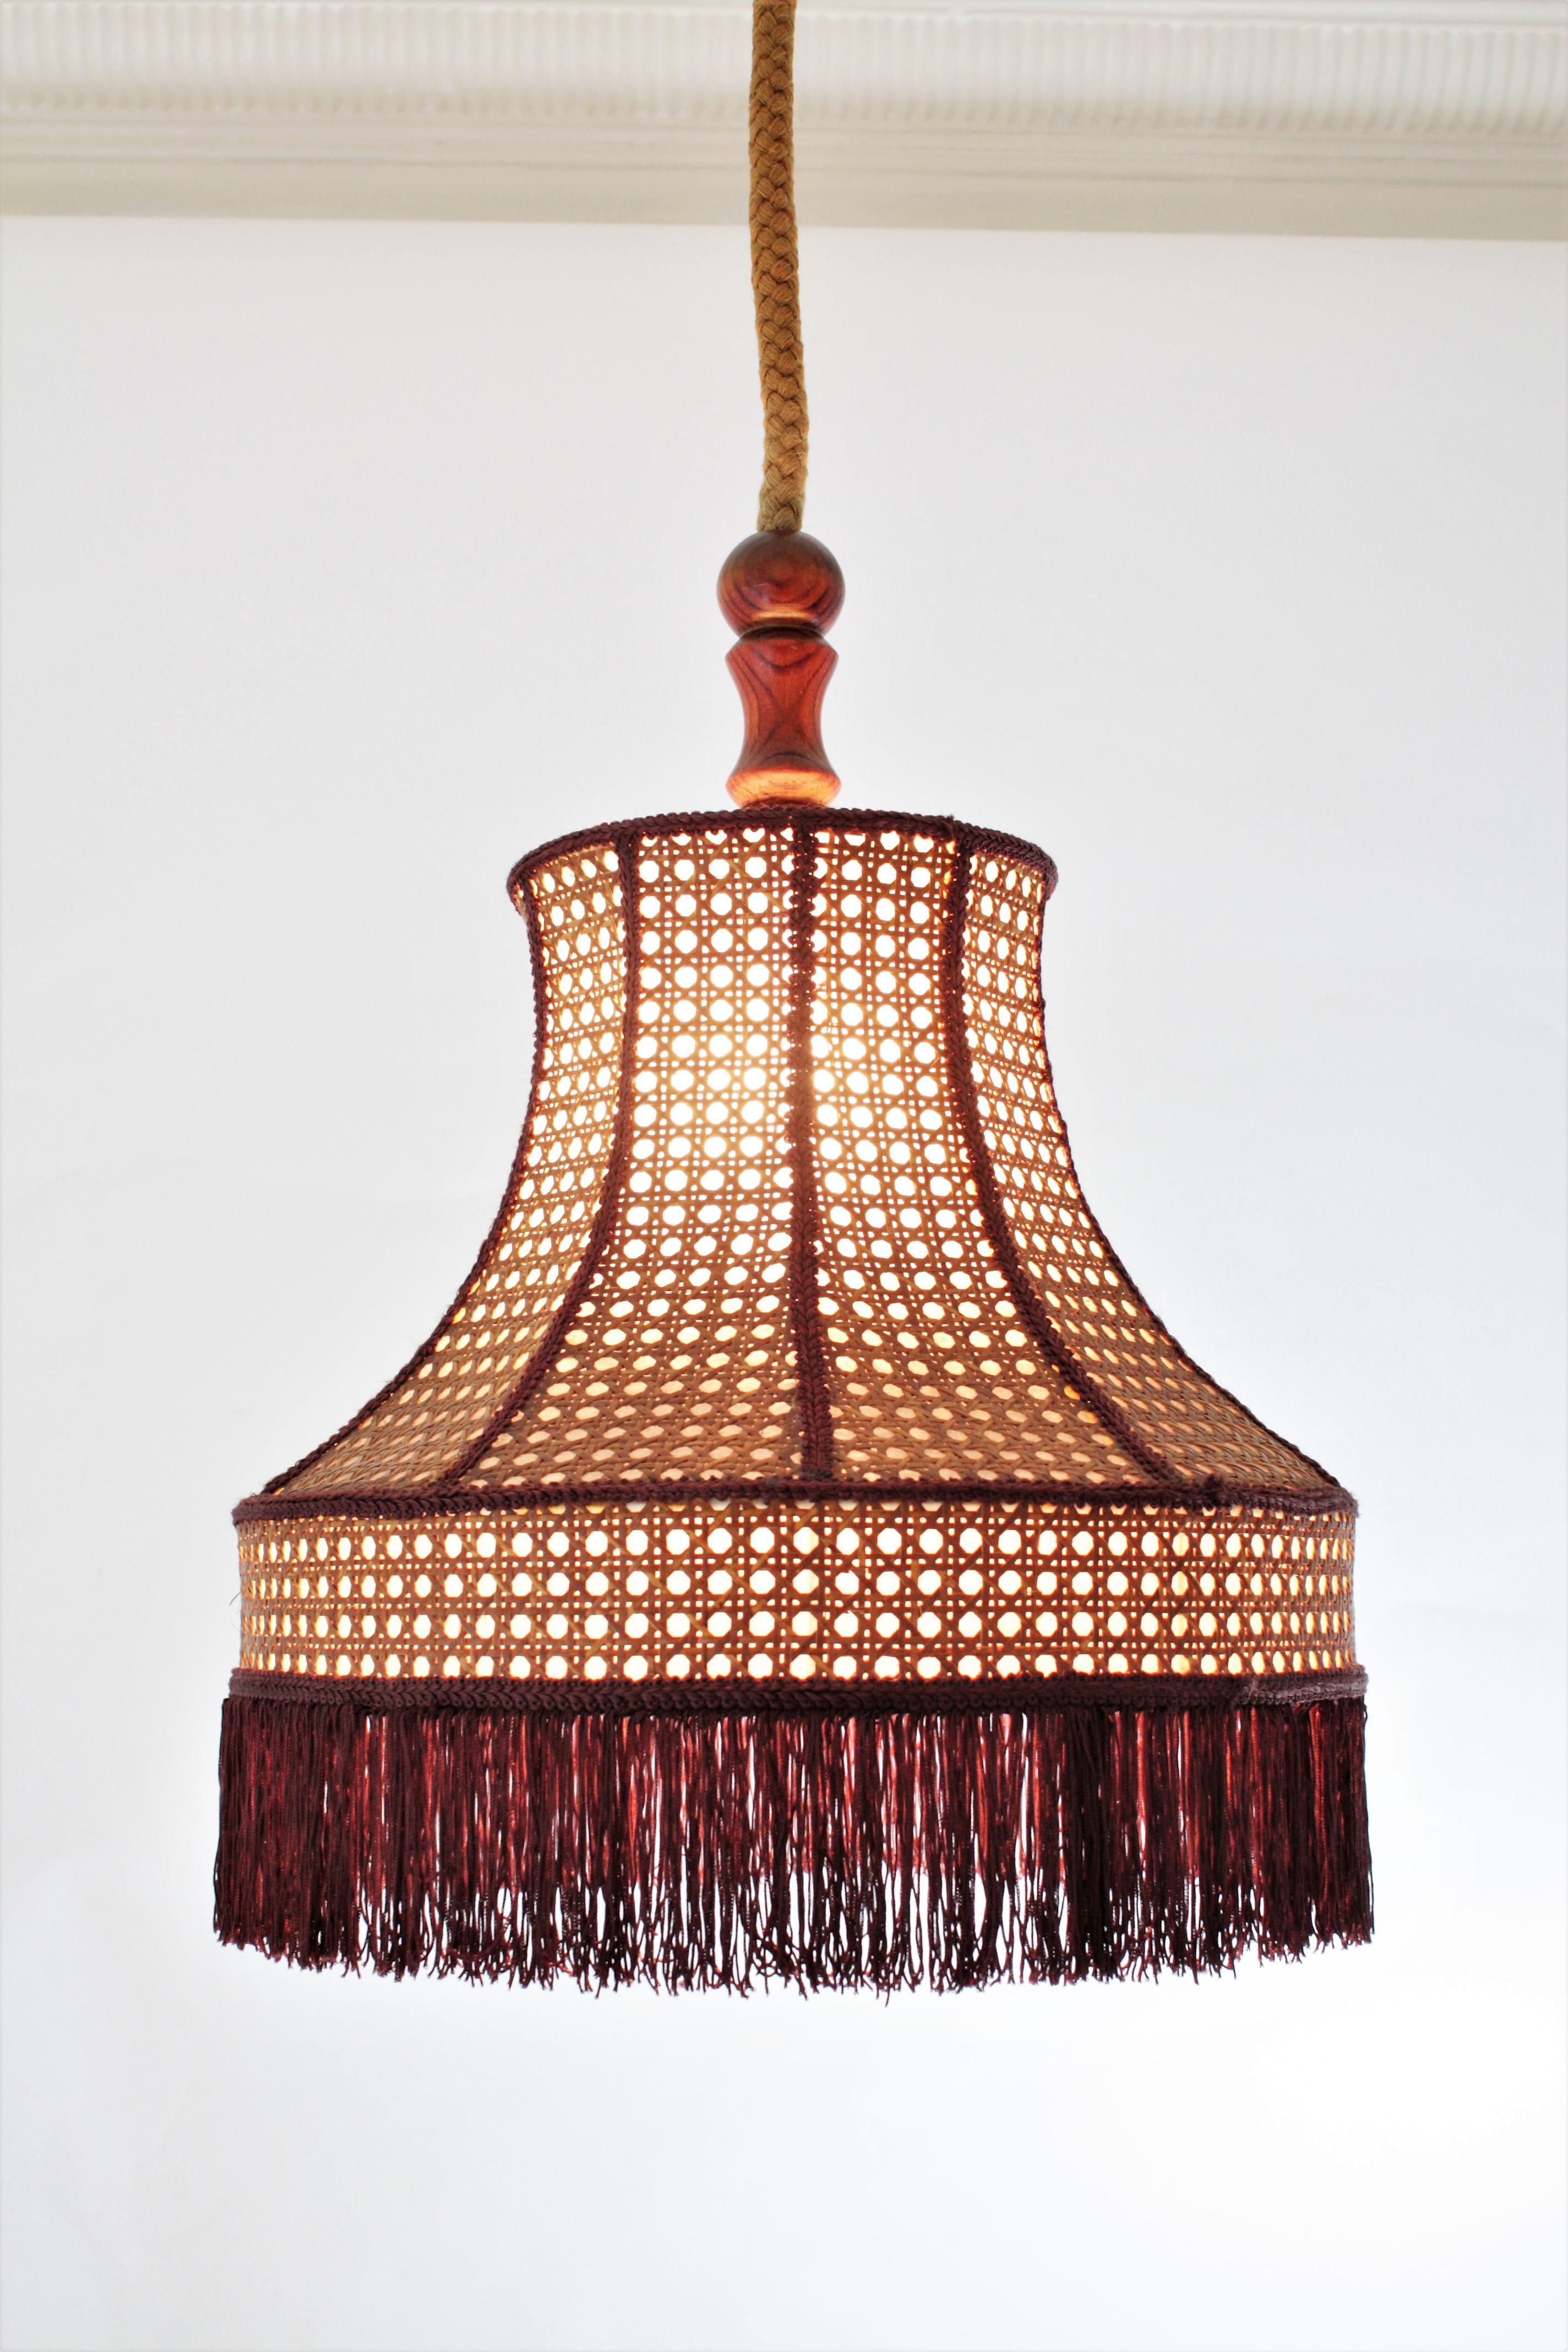 Mid-Century Modern Rattan Wicker Pendant Hanging Lamp with Pagoda Shape and Fringed Bottom